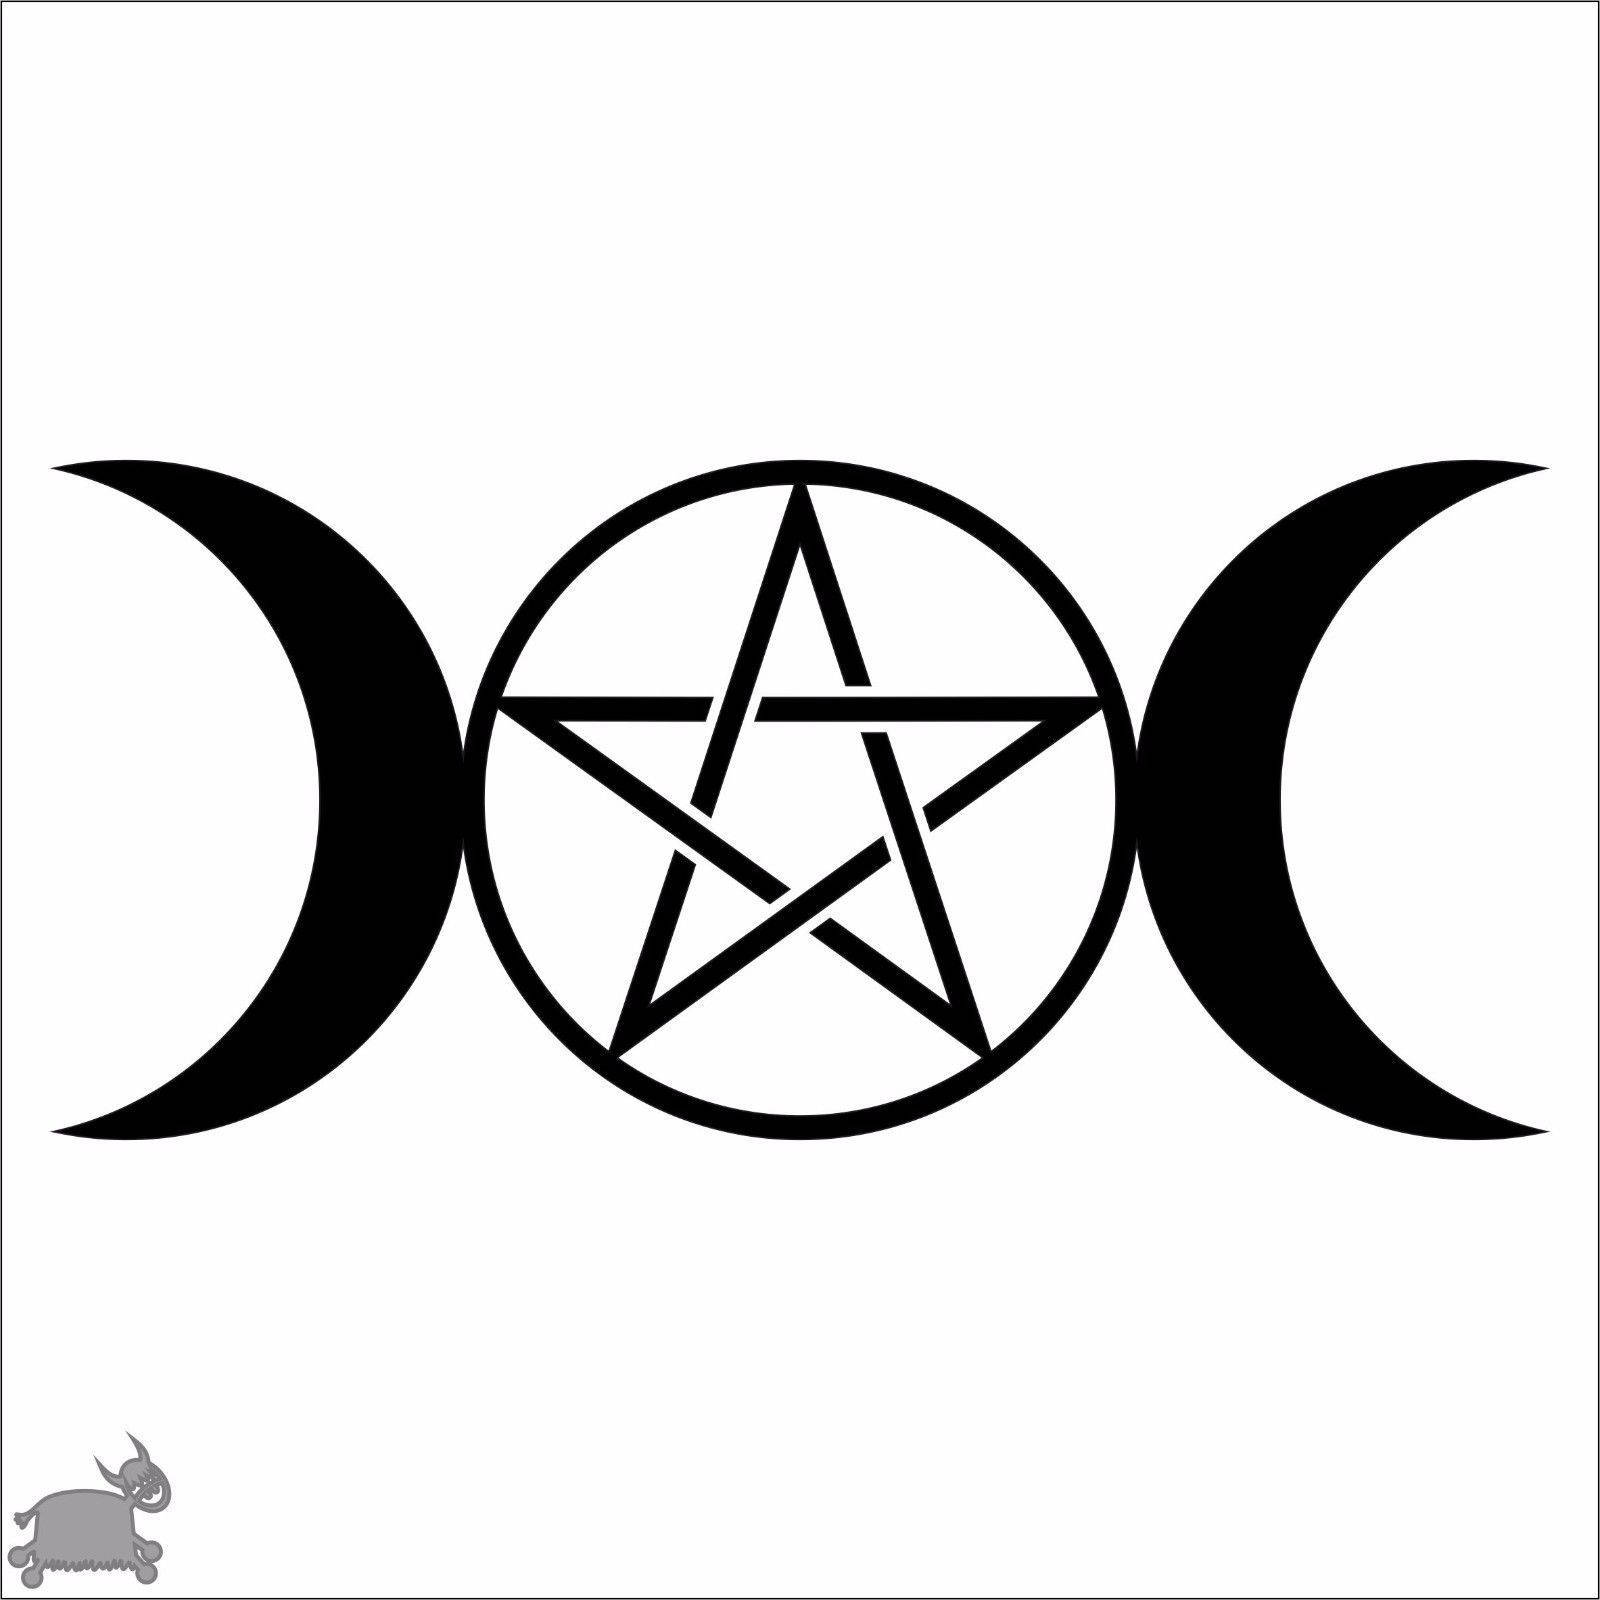 Pentagram With Crescent Moons Background